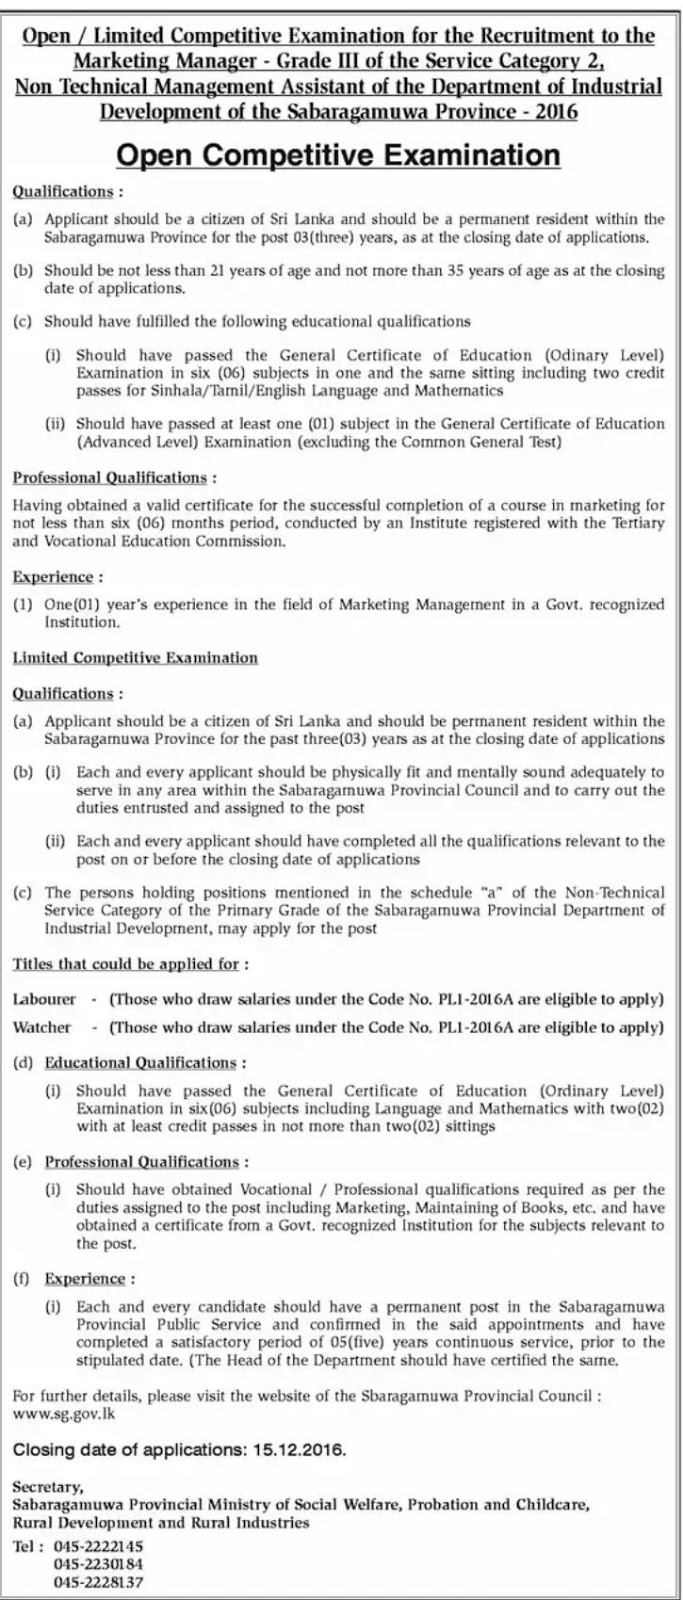 Management Assistant (Marketing Manager) Jobs in Department of Industrial Development